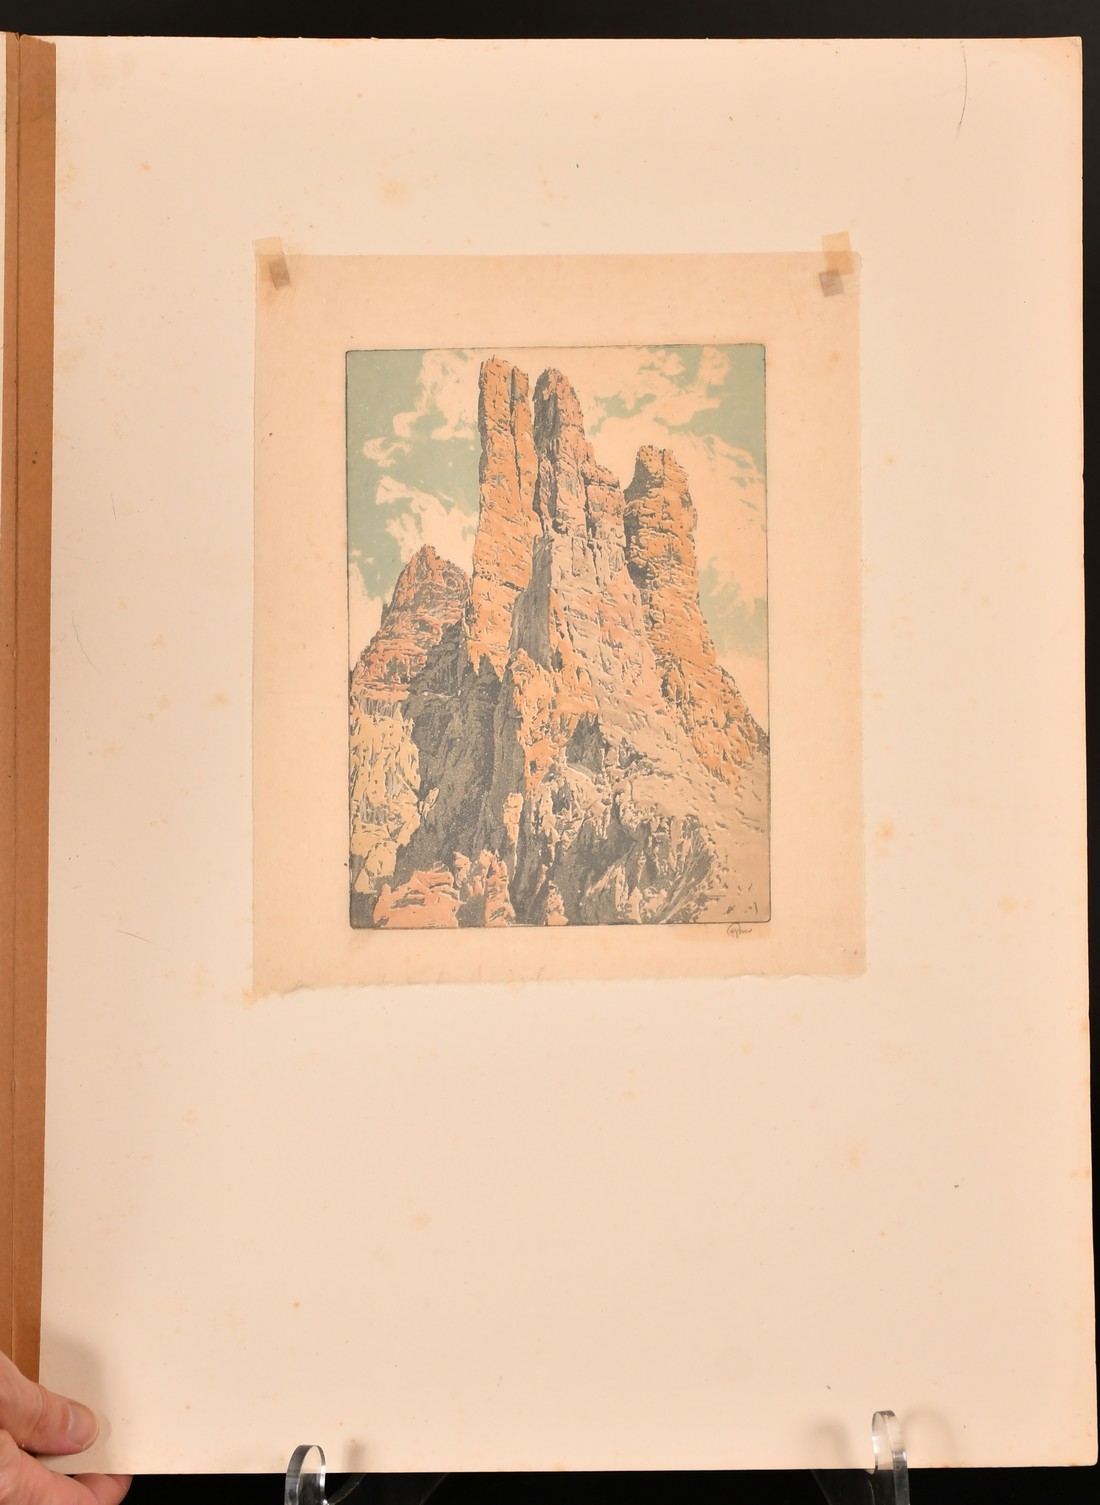 Hans Figura, A Peak in the Dolomites, colour woodblock, signed in pencil, inscribed faintly on the - Image 2 of 3